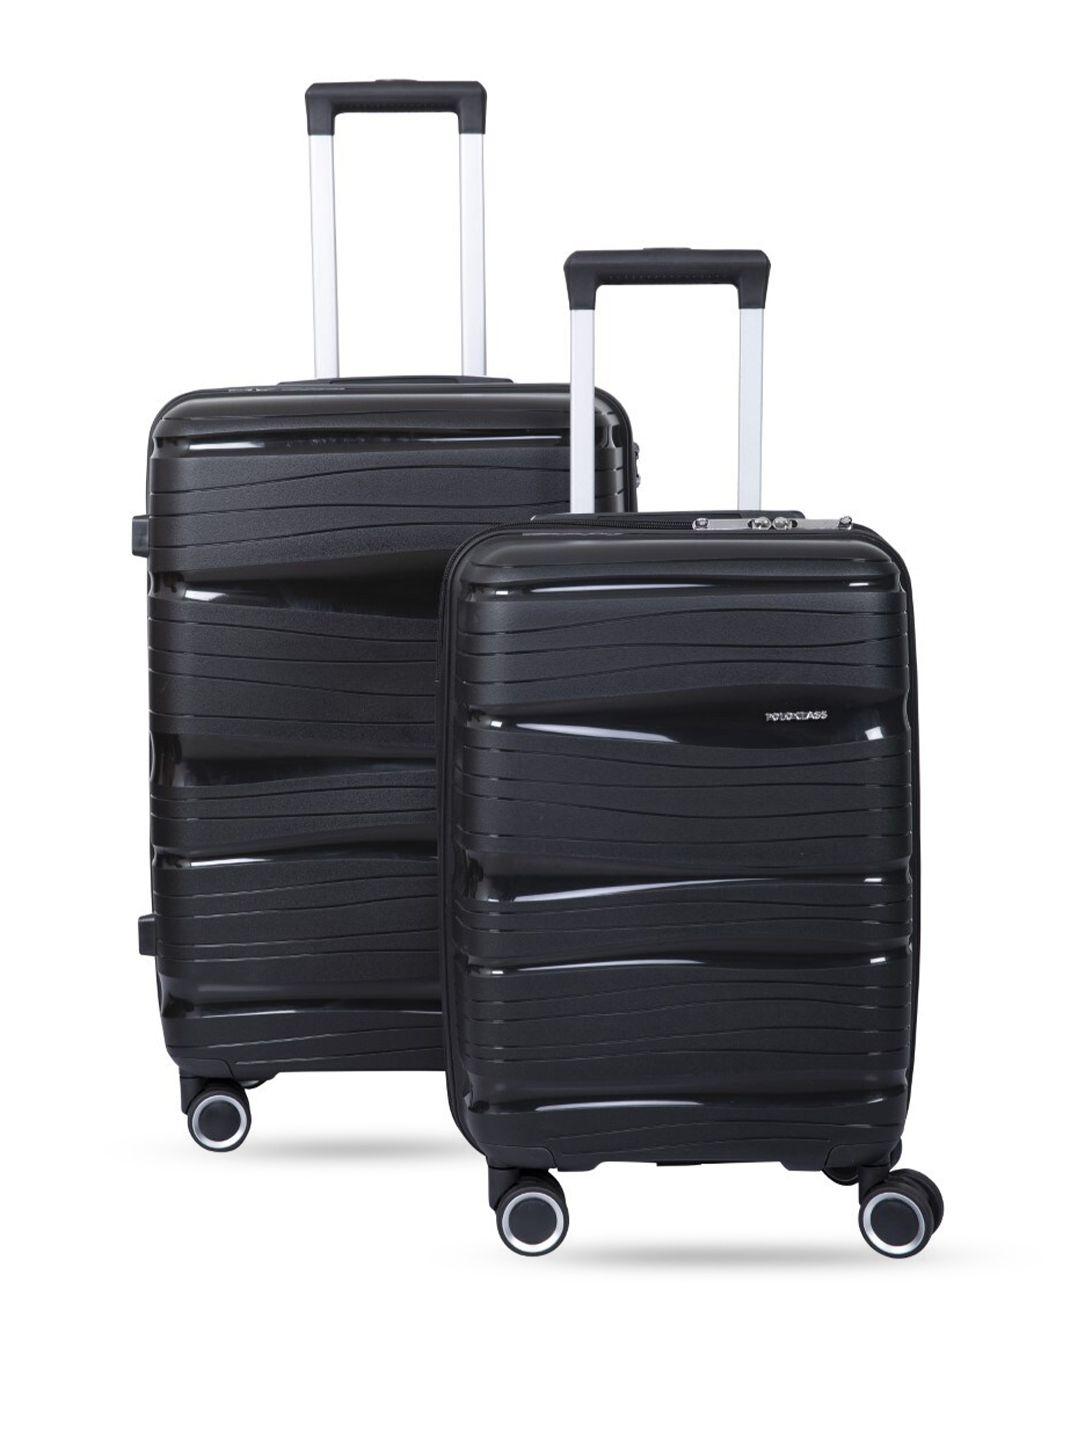 polo class set of 2 hard sided trolly bag-101 to 150 litres